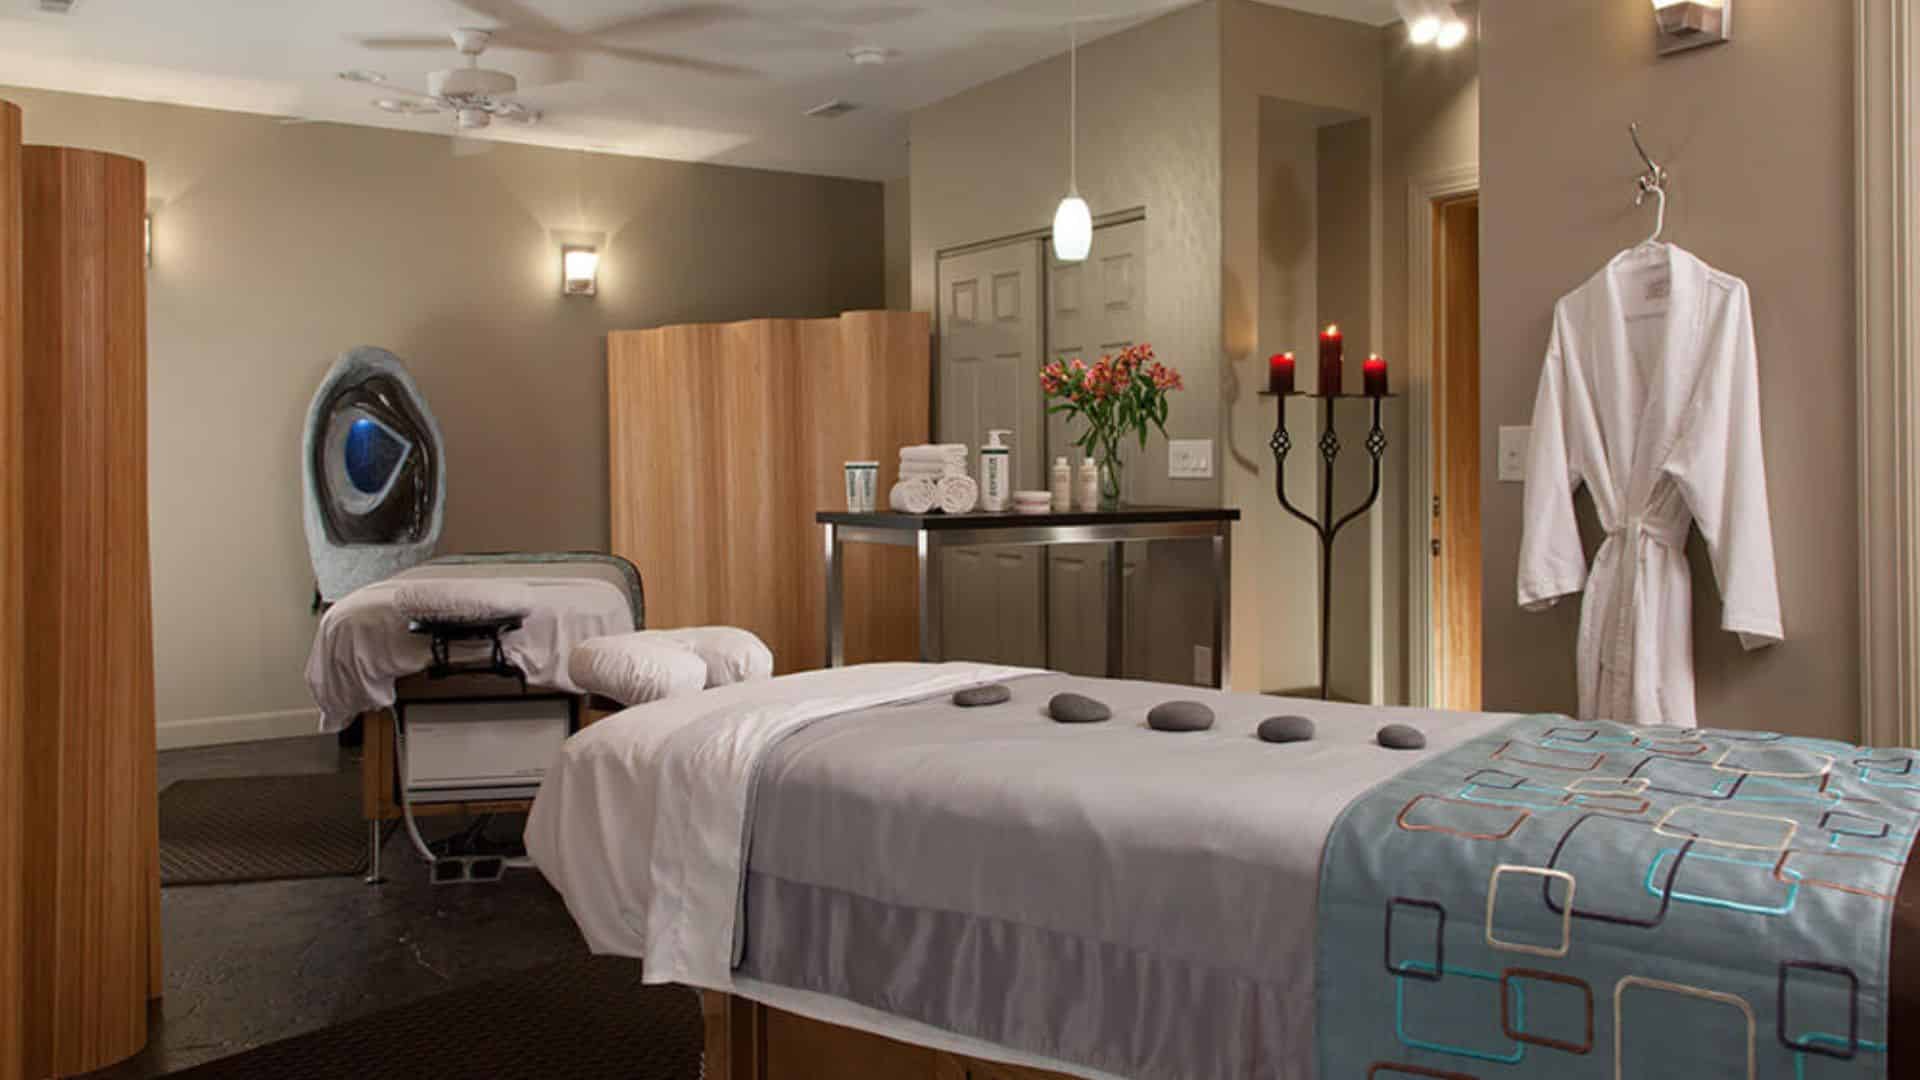 Serene spa room with massage table, hot stones, terry robe, and dim lighting